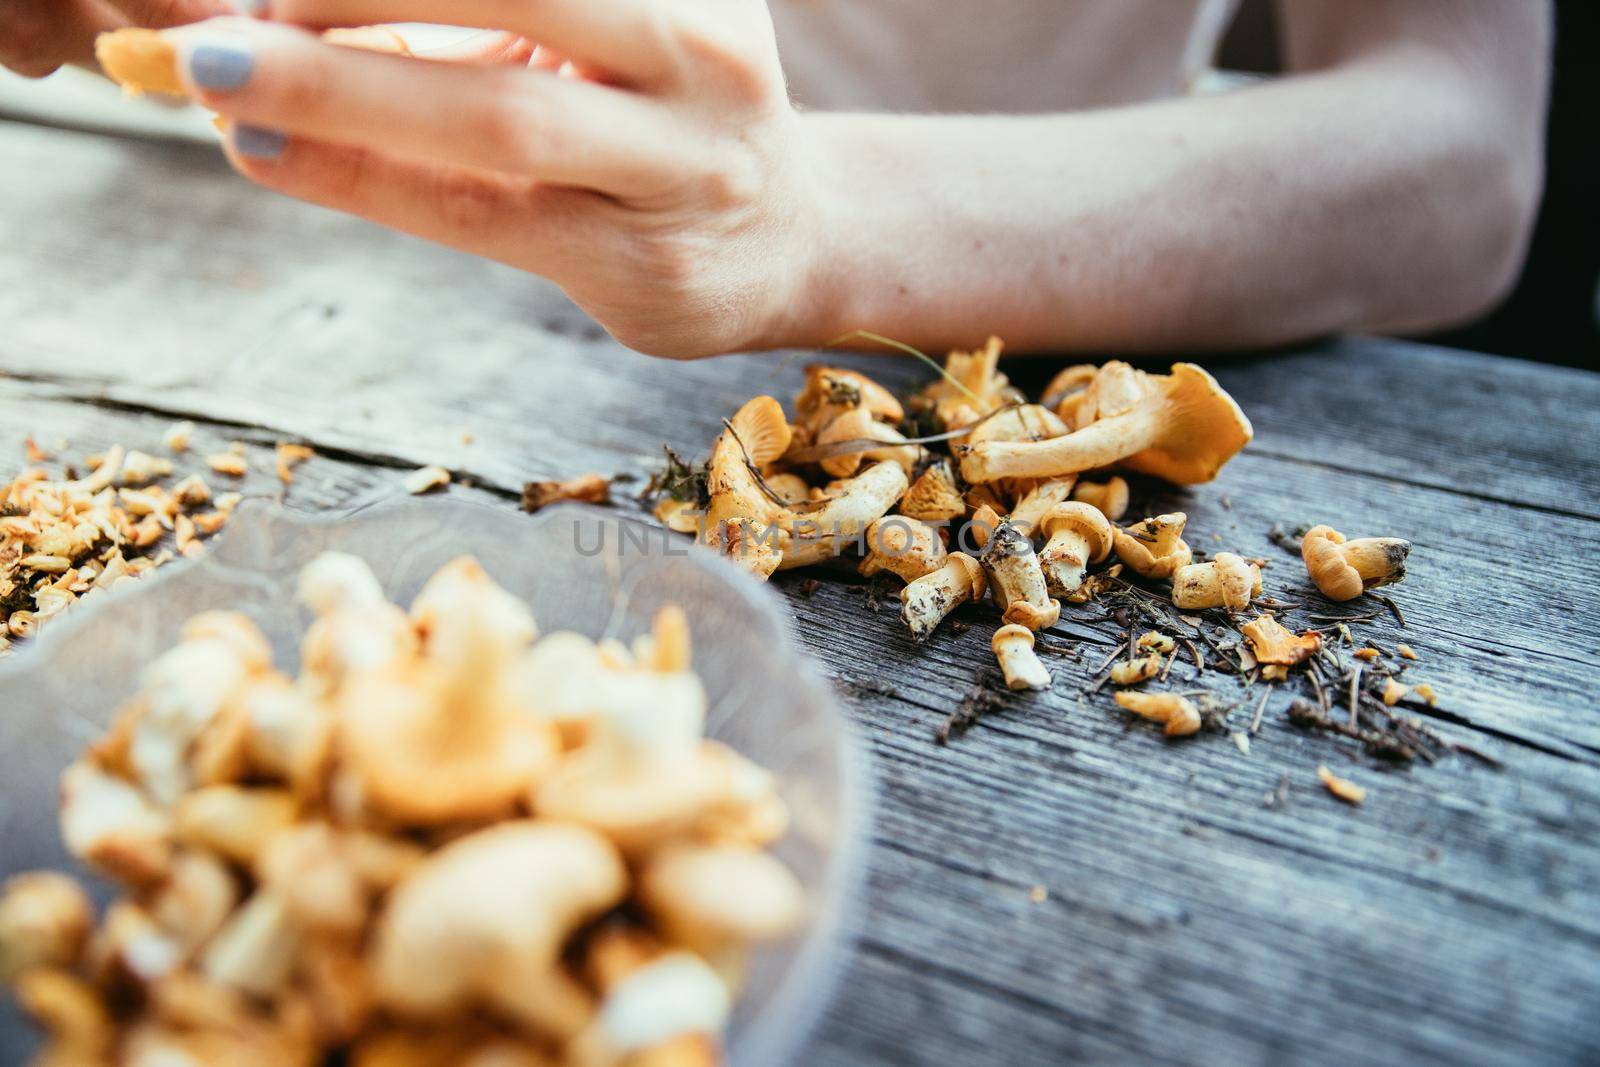 Farm holidays: Woman is preparing delicious chanterelle mushrooms on an old rustic wooden table by Daxenbichler